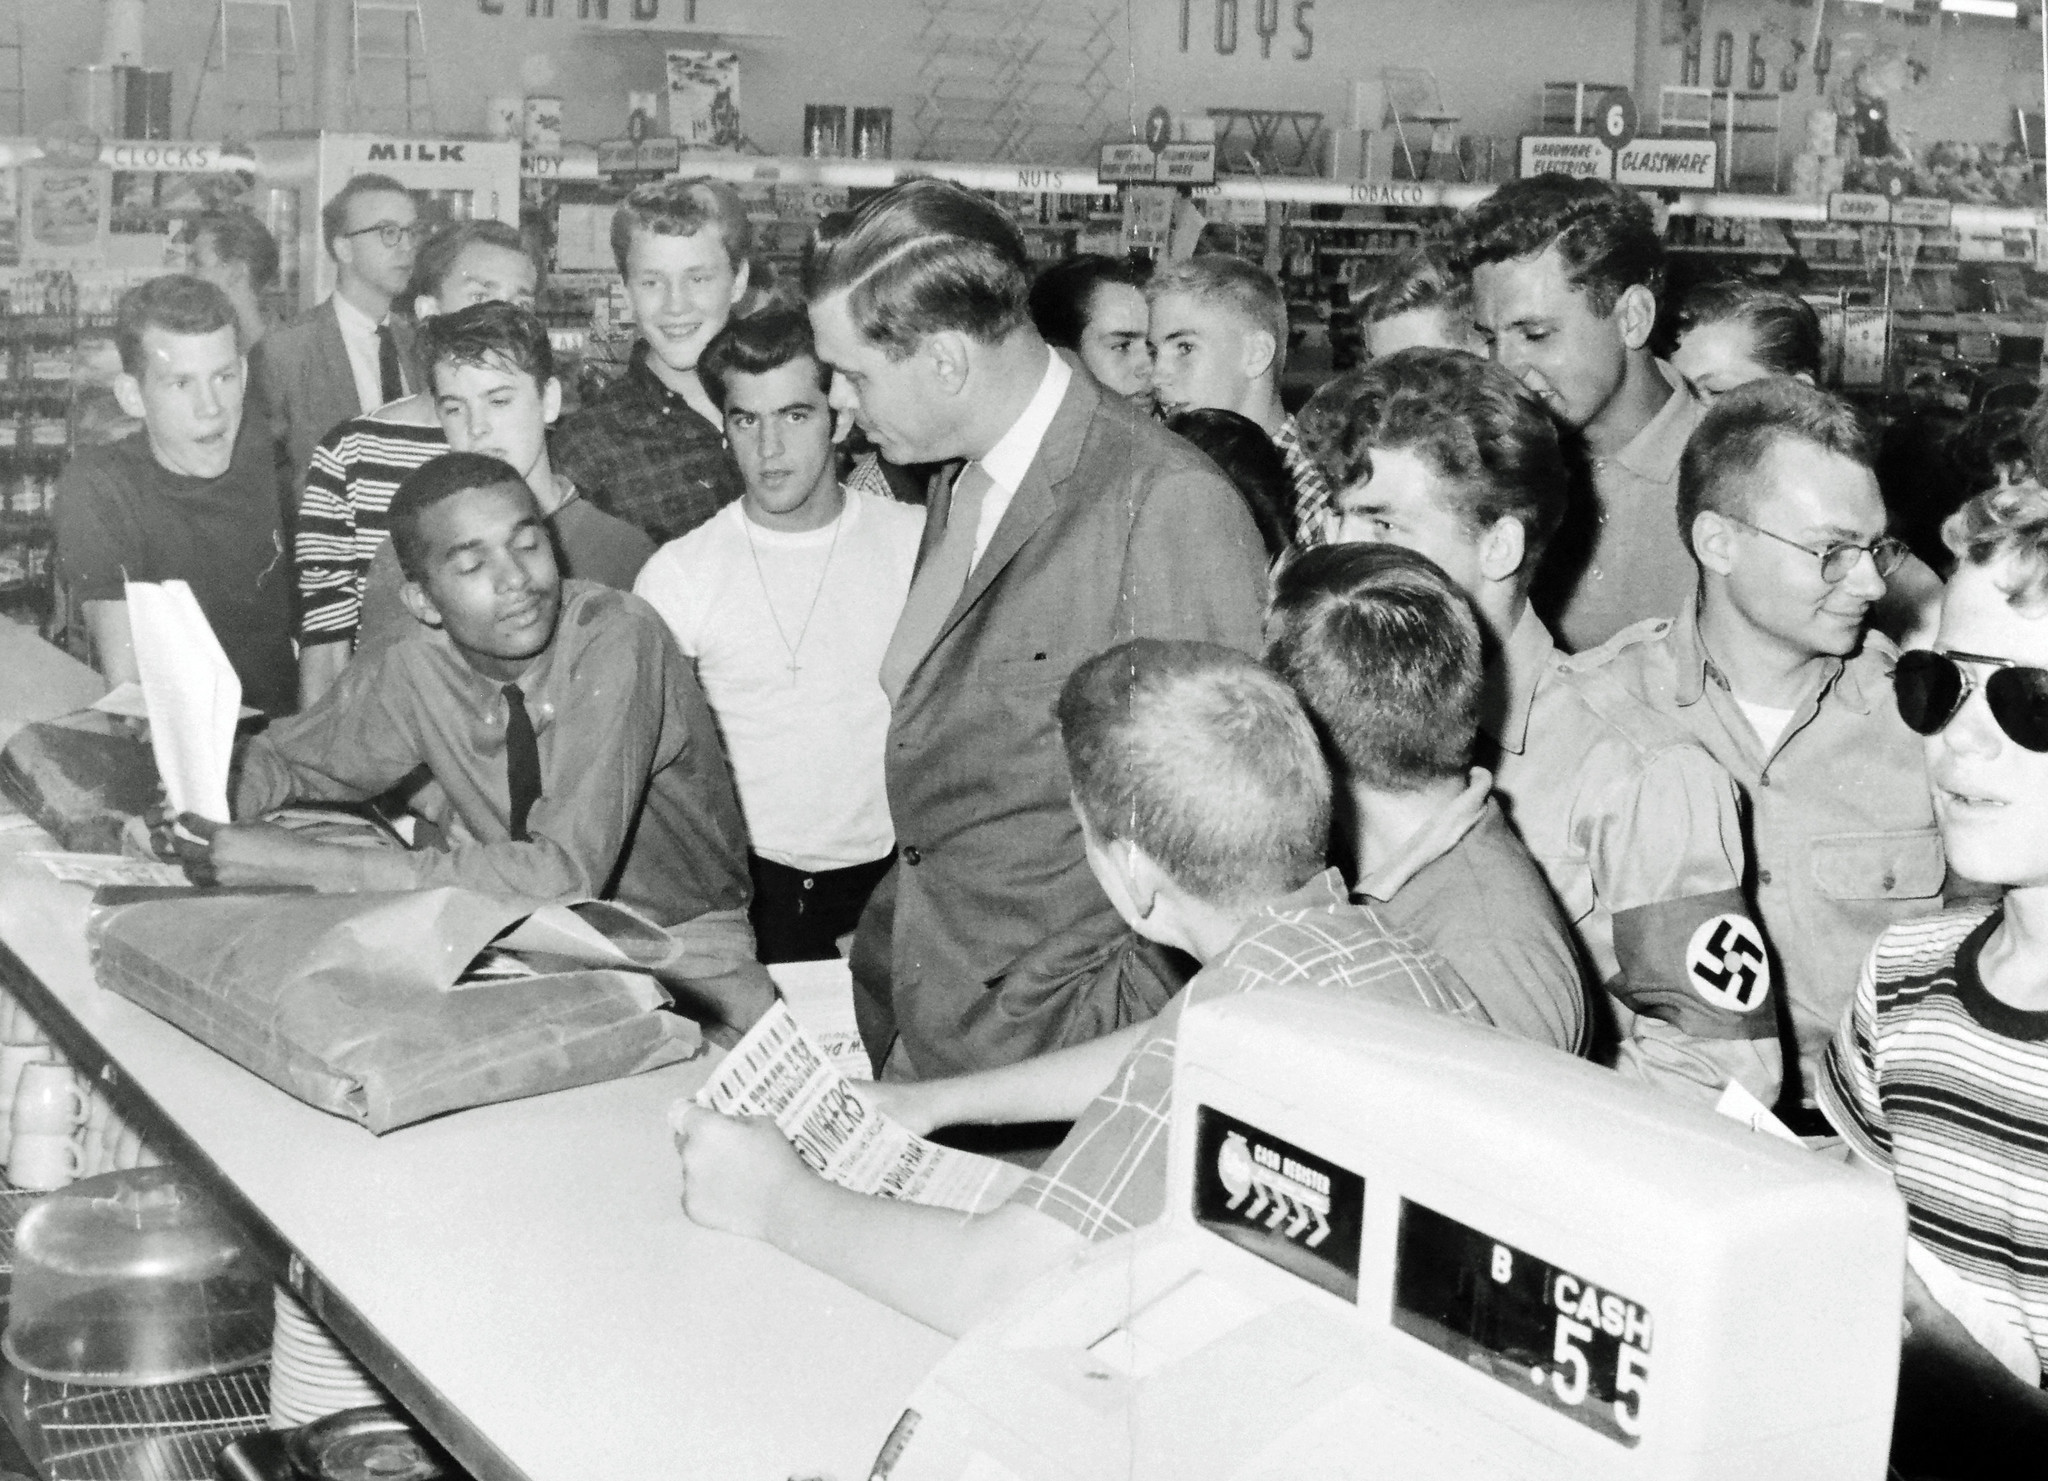 Civil rights activist Dion Diamond is confronted by American Nazi Party chief George Lincoln Rockwell at a sit-in at the Cherrydale Drug Fair in Arlington, June 10, 1960. Source:
DC Public Library, Star Collection © Washington Post.